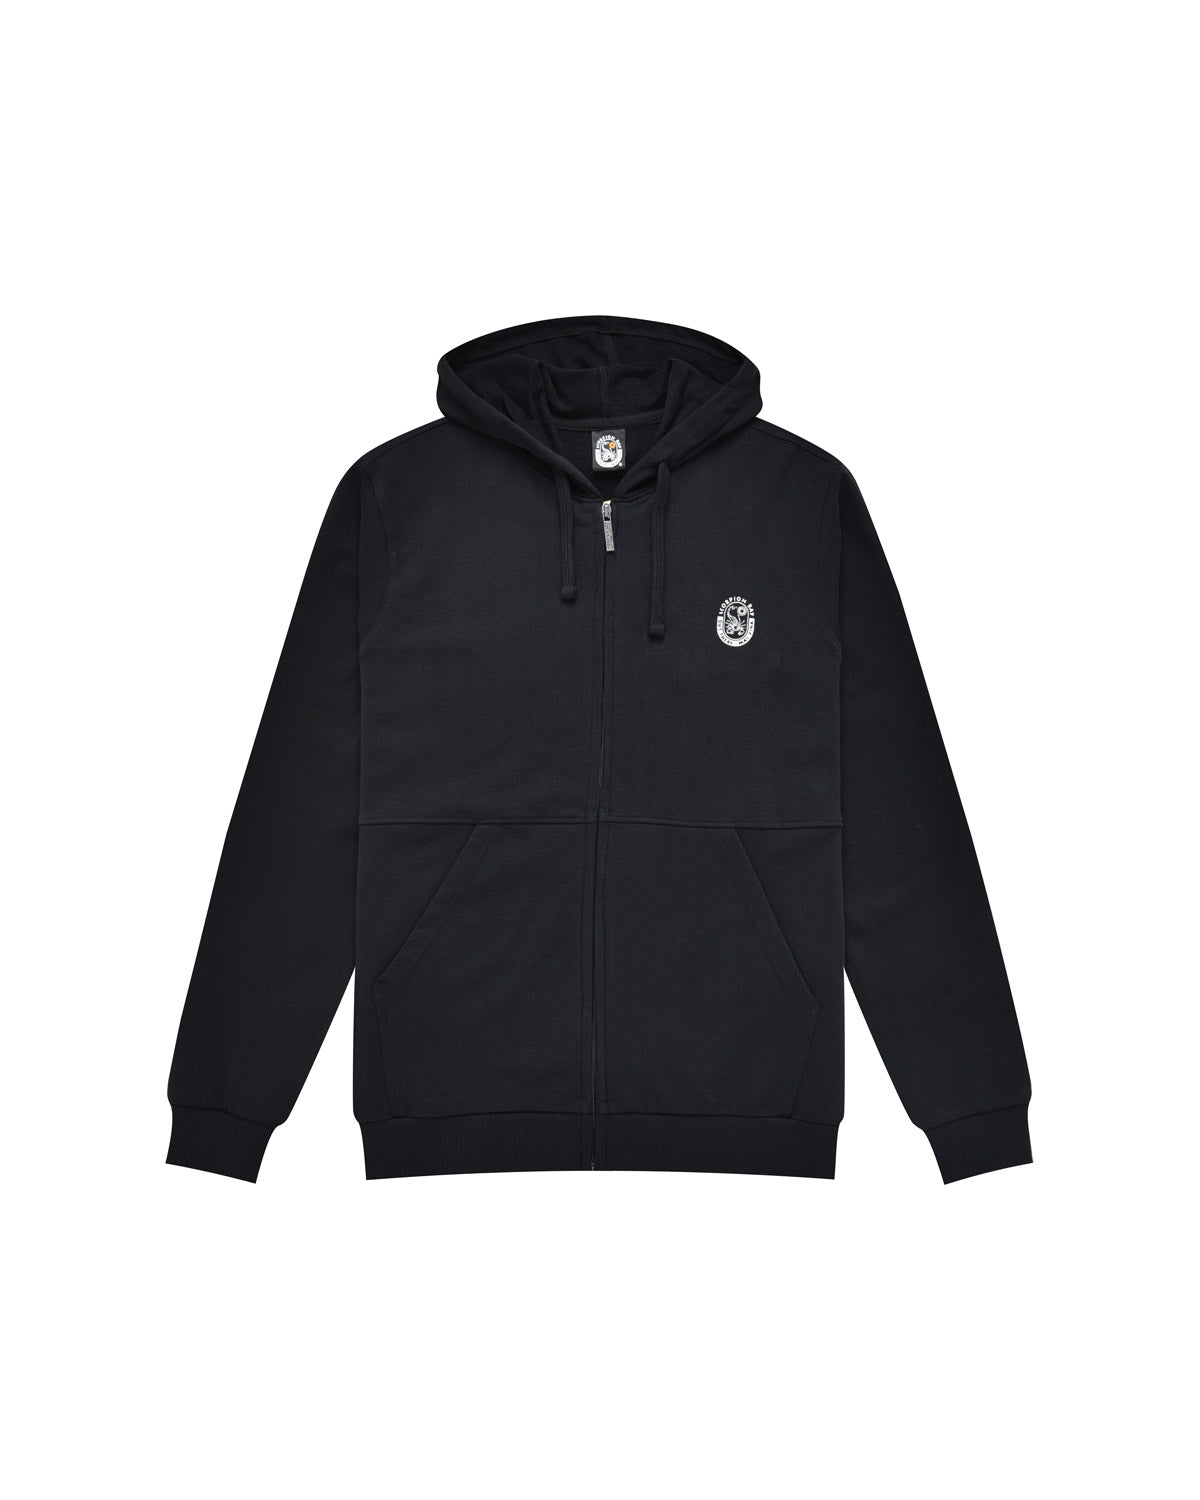 Man | Black "Hell Of A Surfer" Sweatshirt With Hood And Zip 100% Cotton